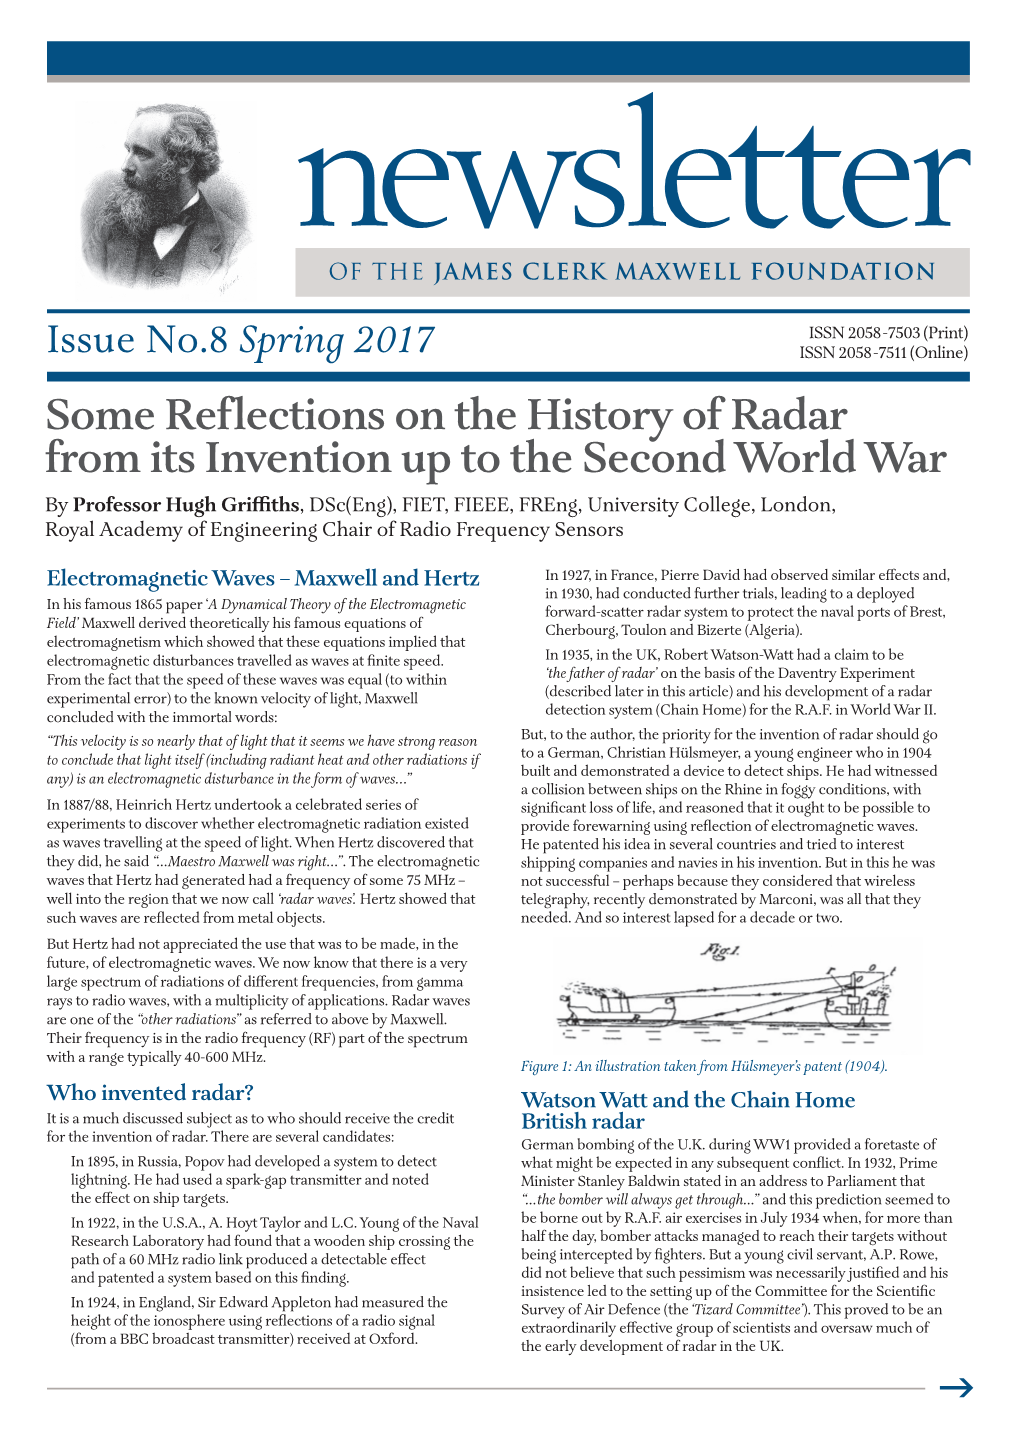 Spring 2017 Some Reflections on the History of Radar from Its Invention